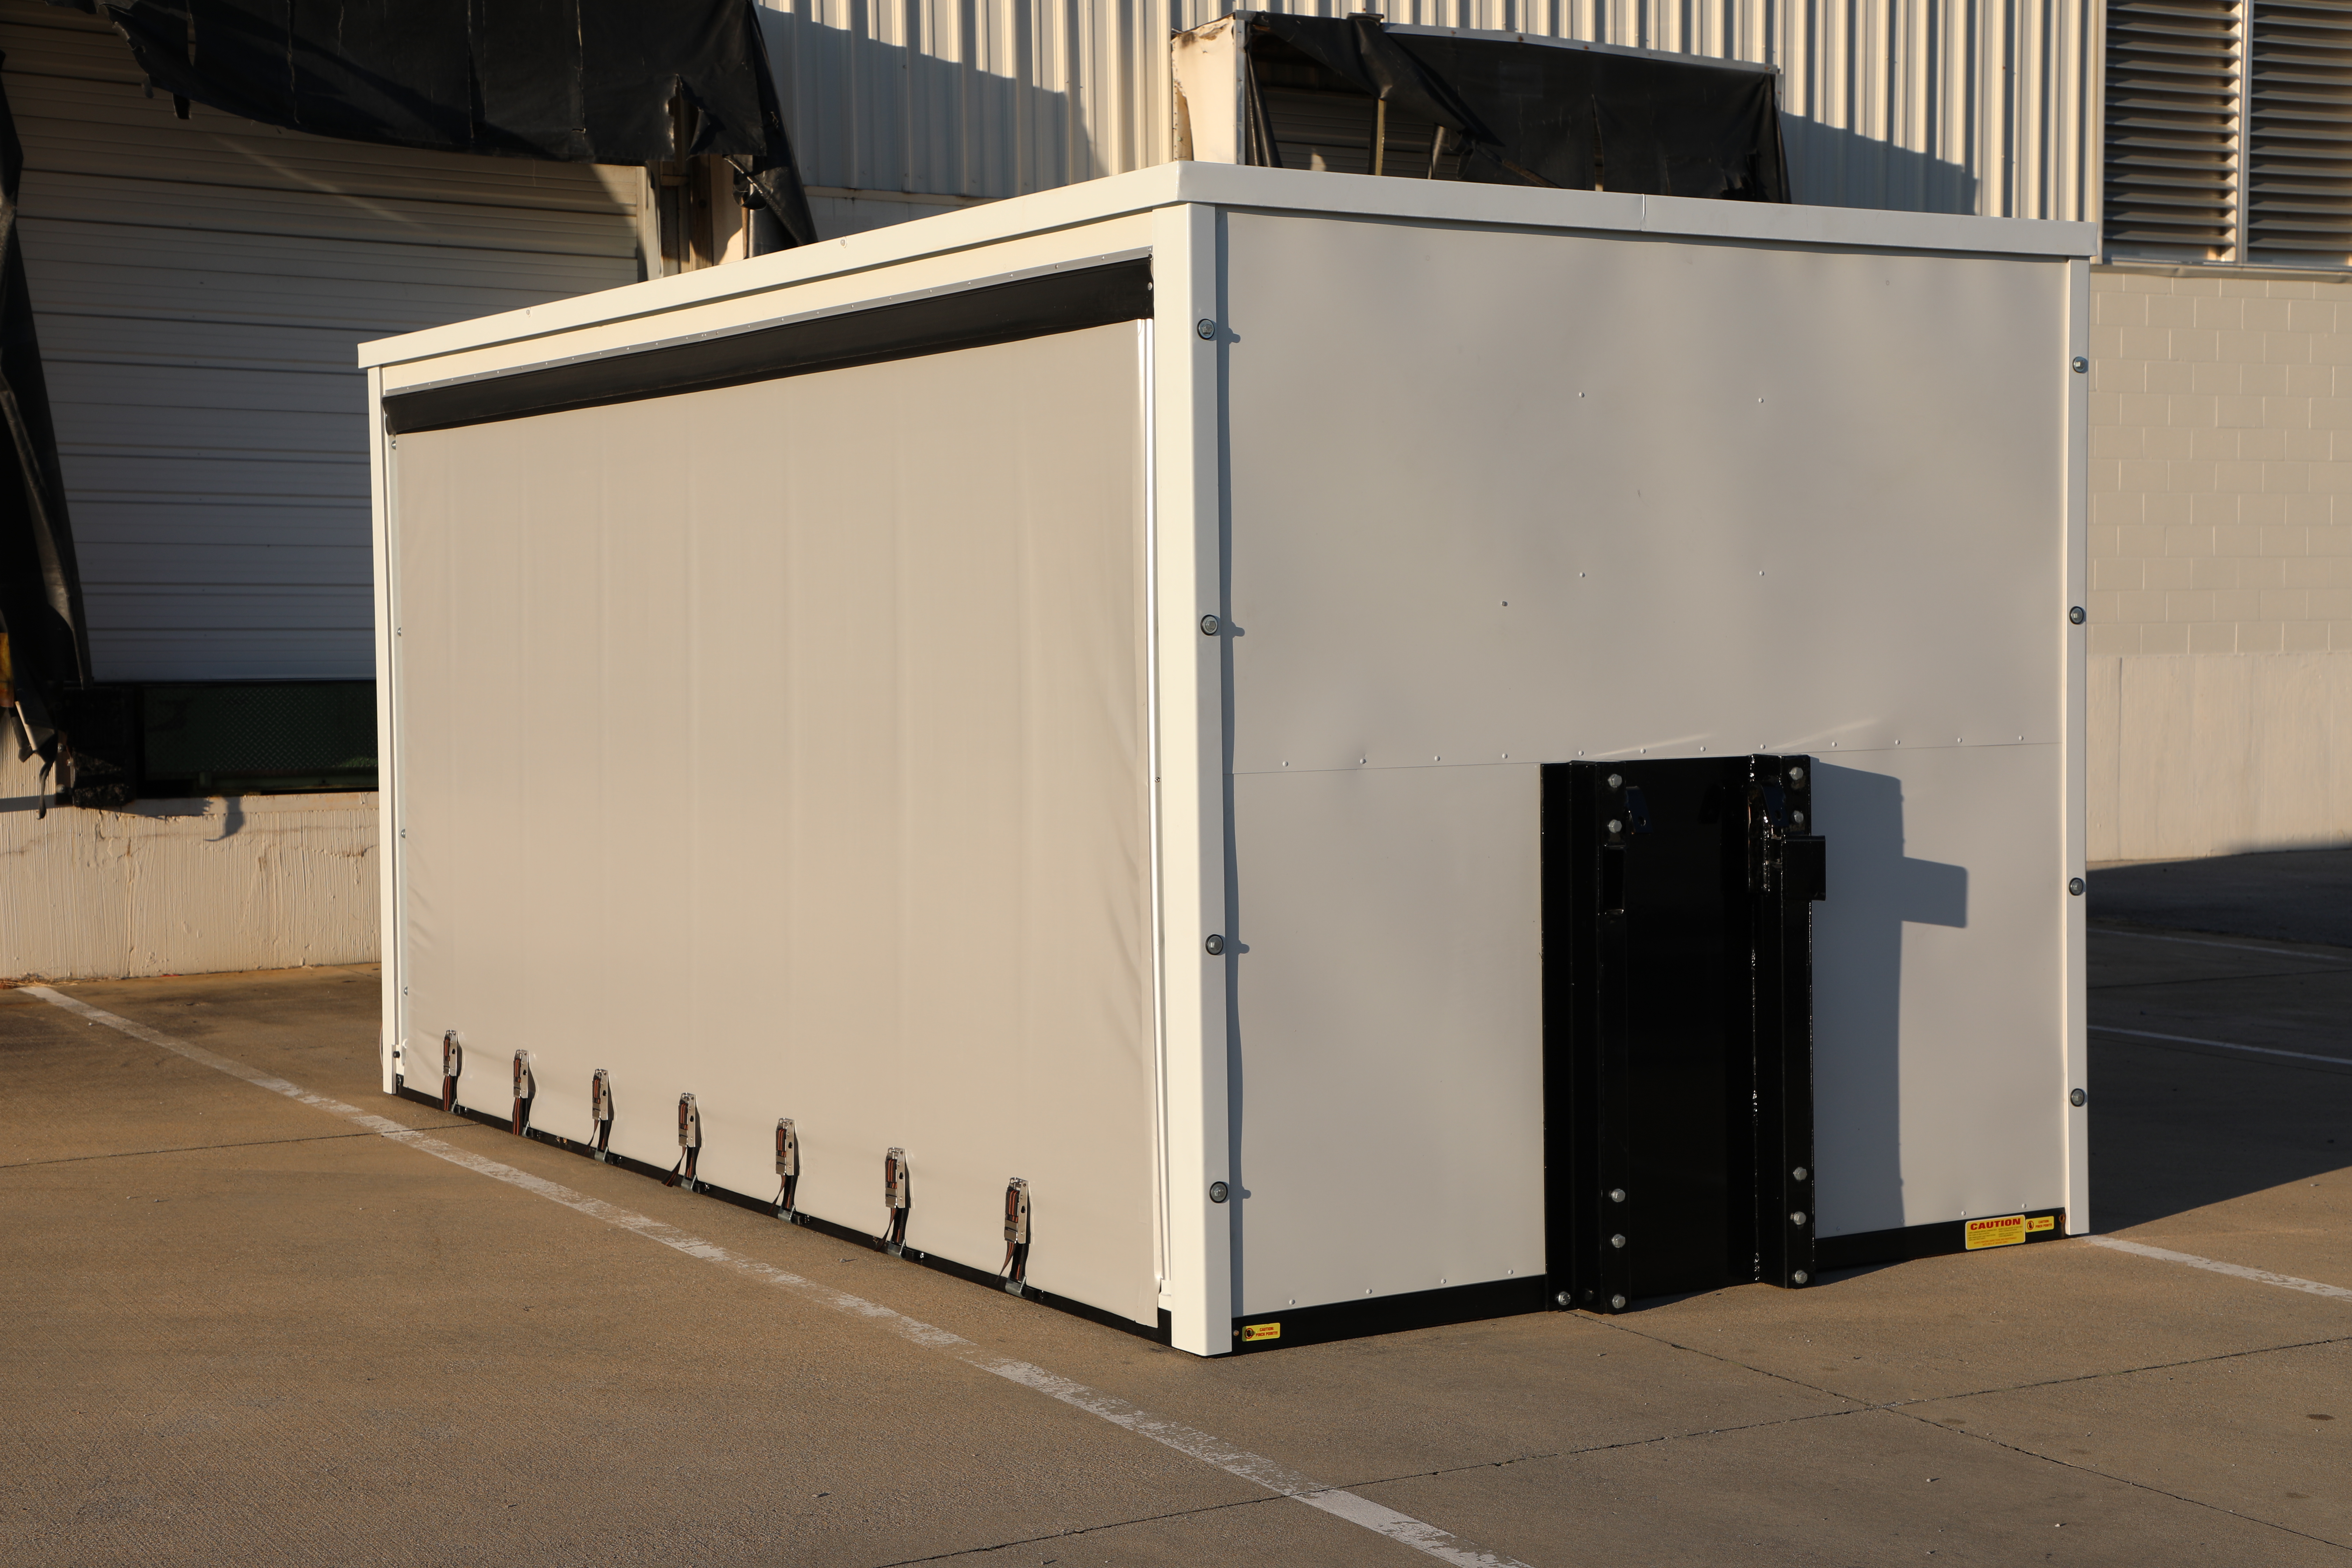 The Titan® C-Series Covered Deck can be detached for on-site dry storage of equipment or pallets